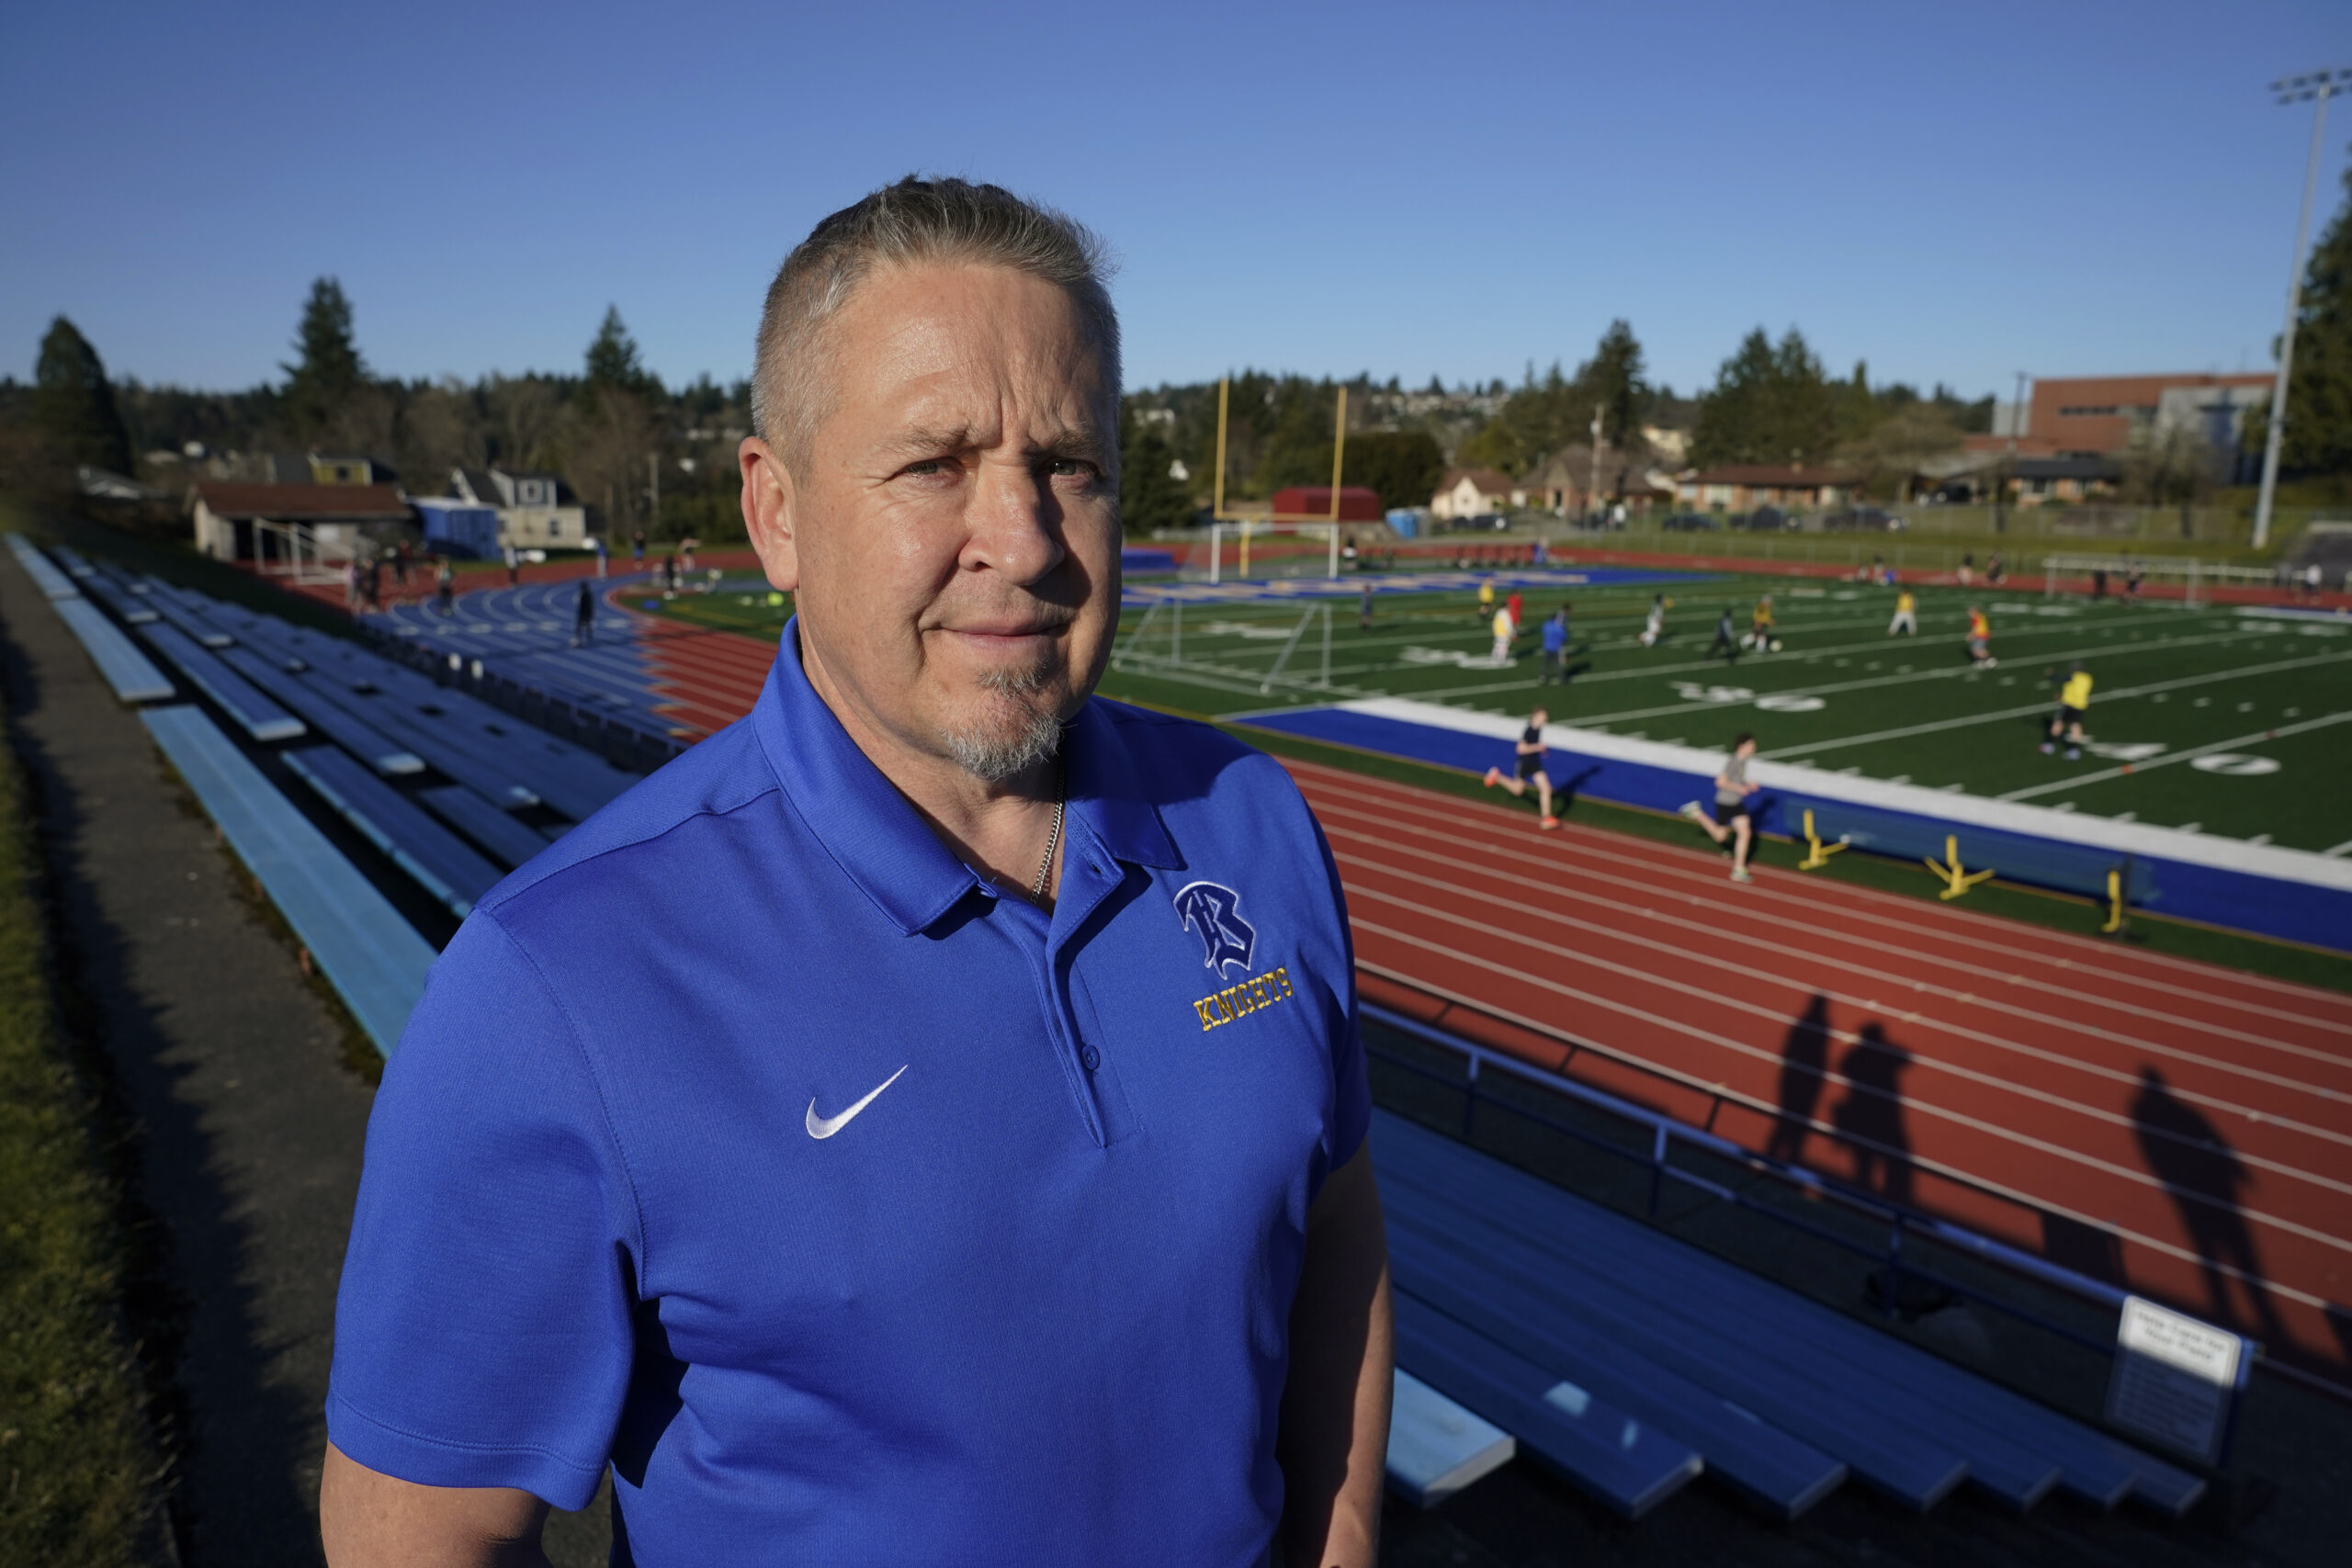 Joe Kennedy, a former assistant football coach at Bremerton High School in Bremerton, Washington, poses for a photo March 9, 2022, at the school’s football field. After losing his coaching job for refusing to stop kneeling in prayer with players and spectators on the field immediately after football games, Kennedy took his arguments before the U.S. Supreme Court on April 25, 2022, saying the Bremerton School District violated his First Amendment rights by refusing to let him continue praying at midfield after games. (AP Photo/Ted S. Warren)